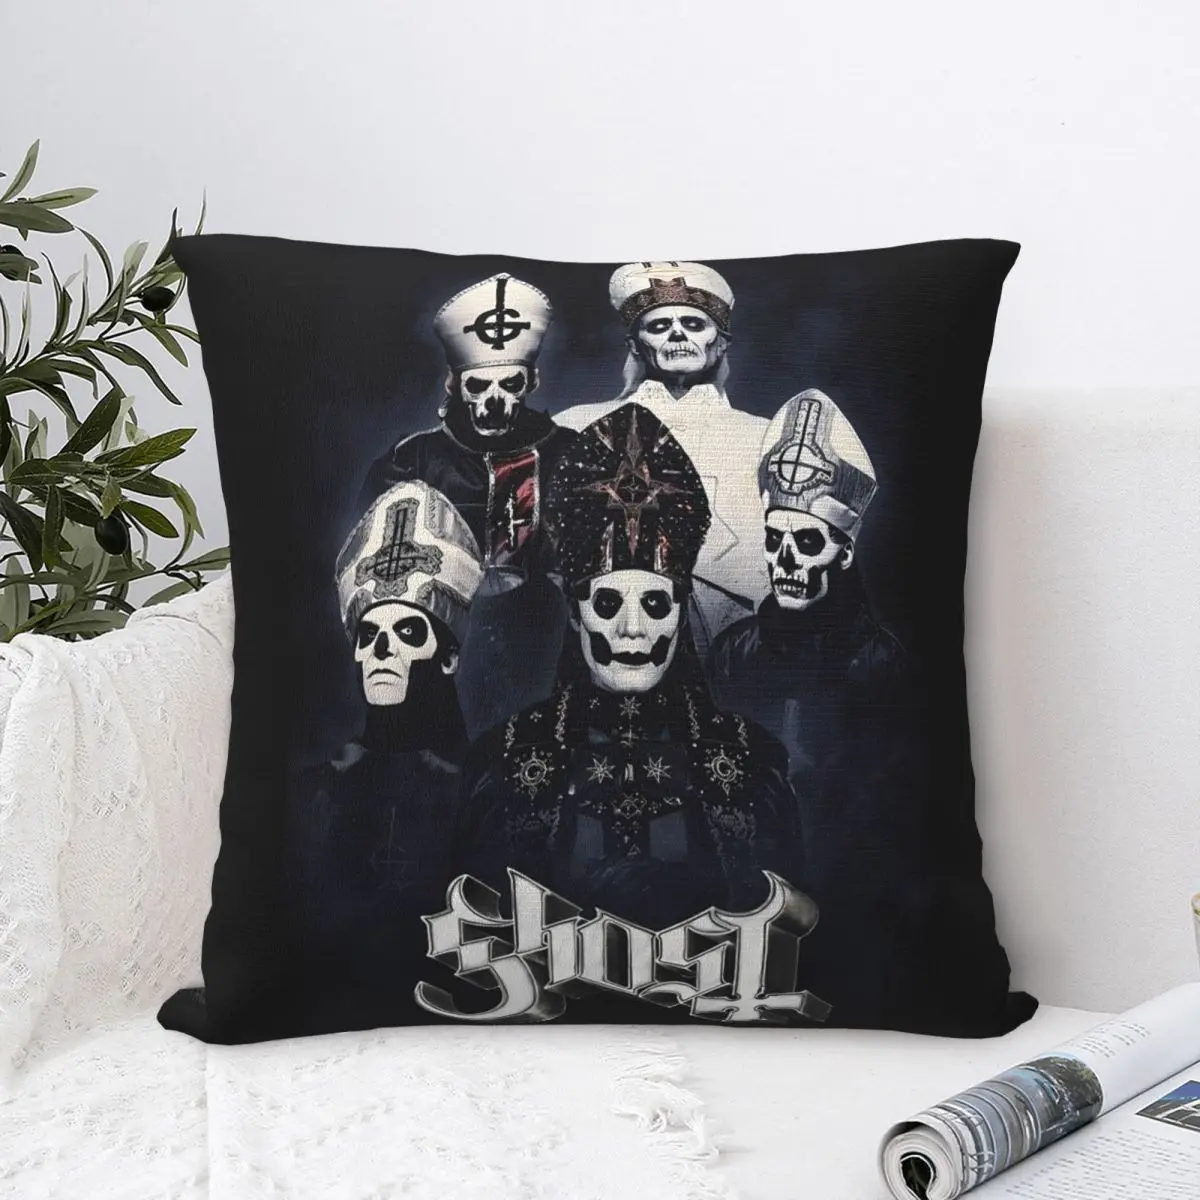 

G-Ghost Music Pillow Cover Swedish Rock Band Fashion Pillow Case Soft Graphic Cushion Cover Pillowcases For Living Room Chair